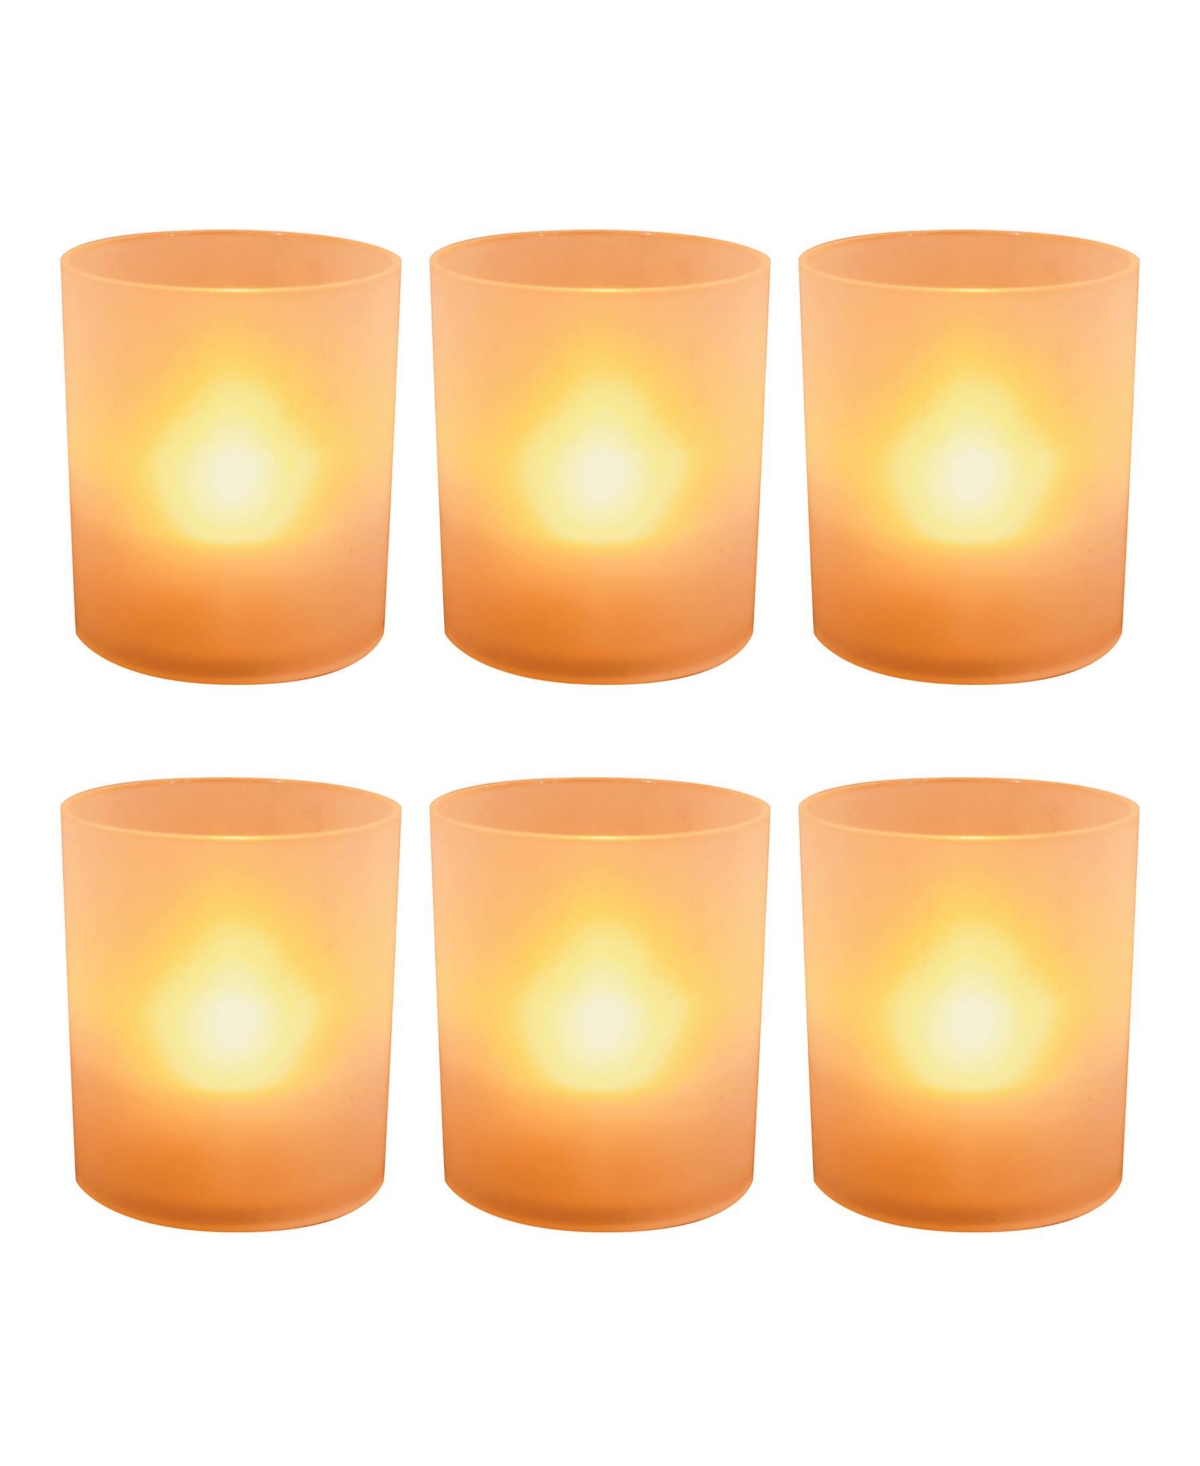 Battery Operated Led Lights in Frosted Votive Holders, 6 Pieces - Orange